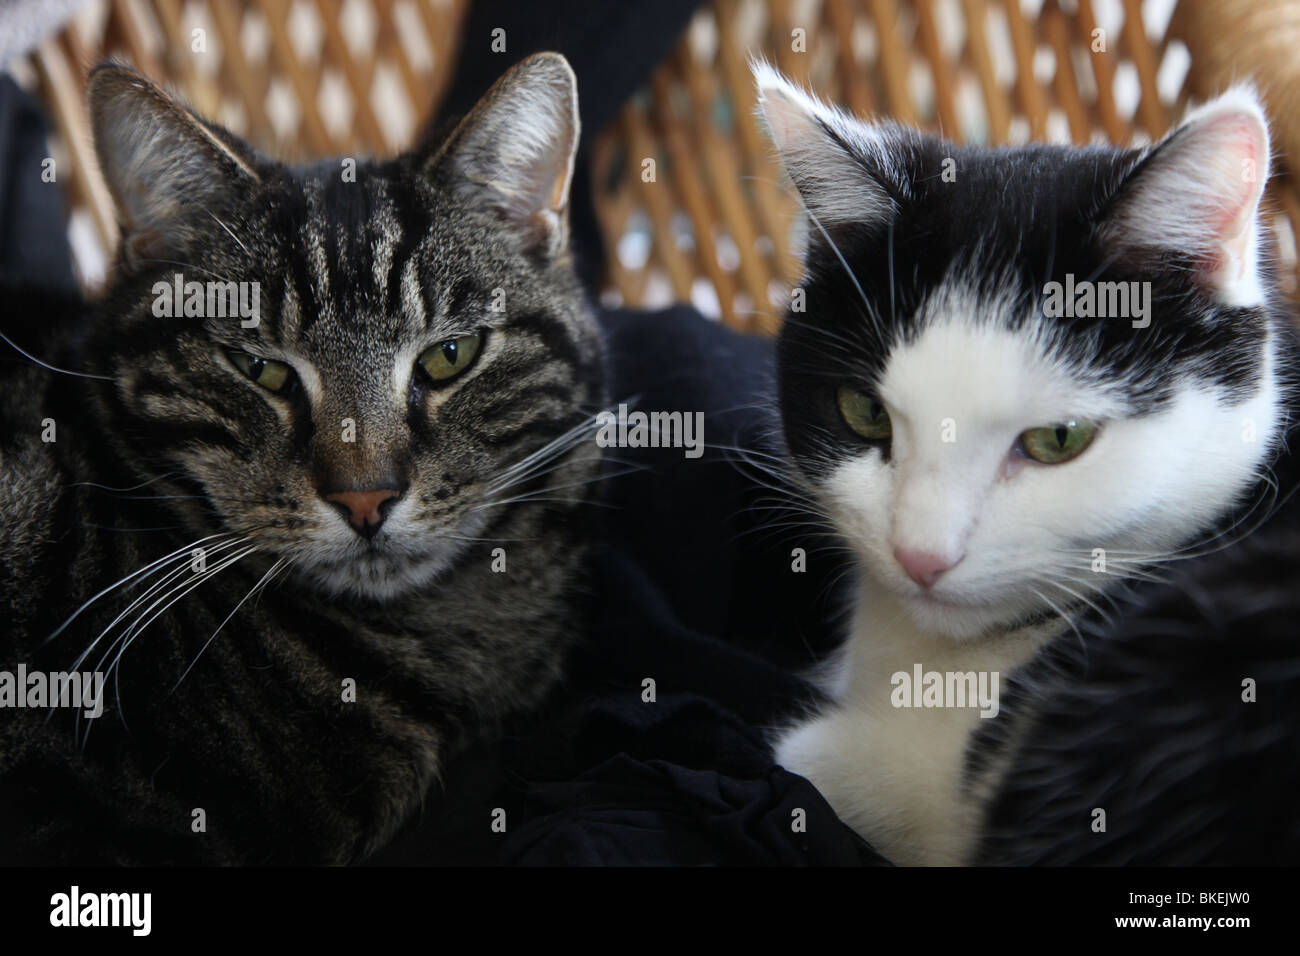 Tabby Cat And Black And White Cat Stock Photo Alamy